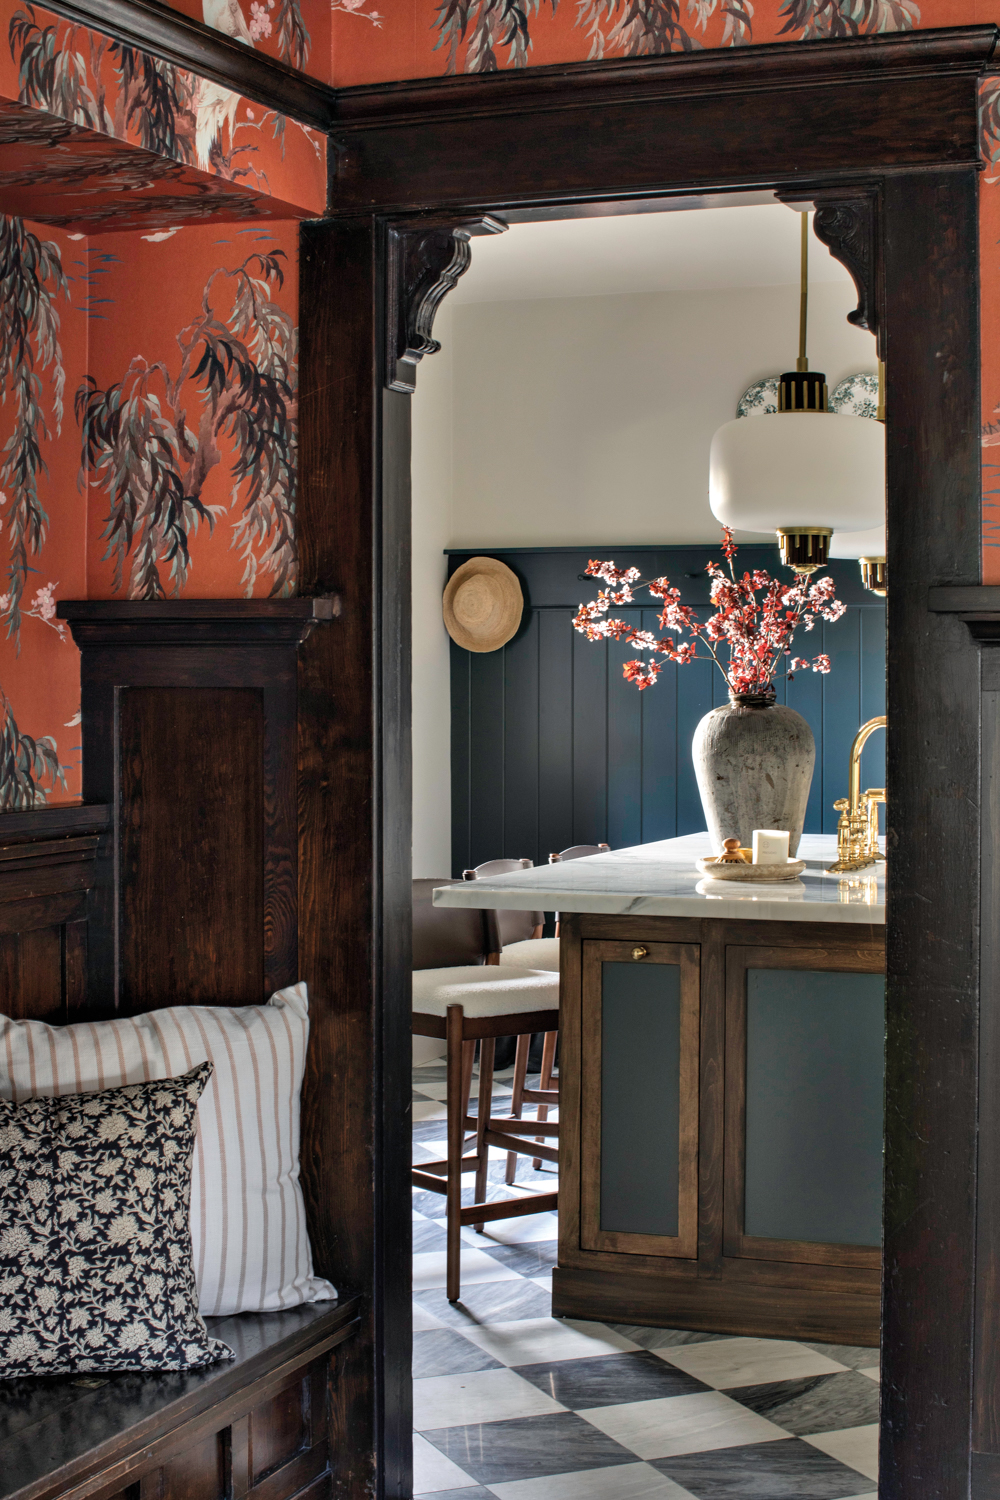 bar seen through an arch with dark-wood moldings with a patterned orange wallpaper surrounding it